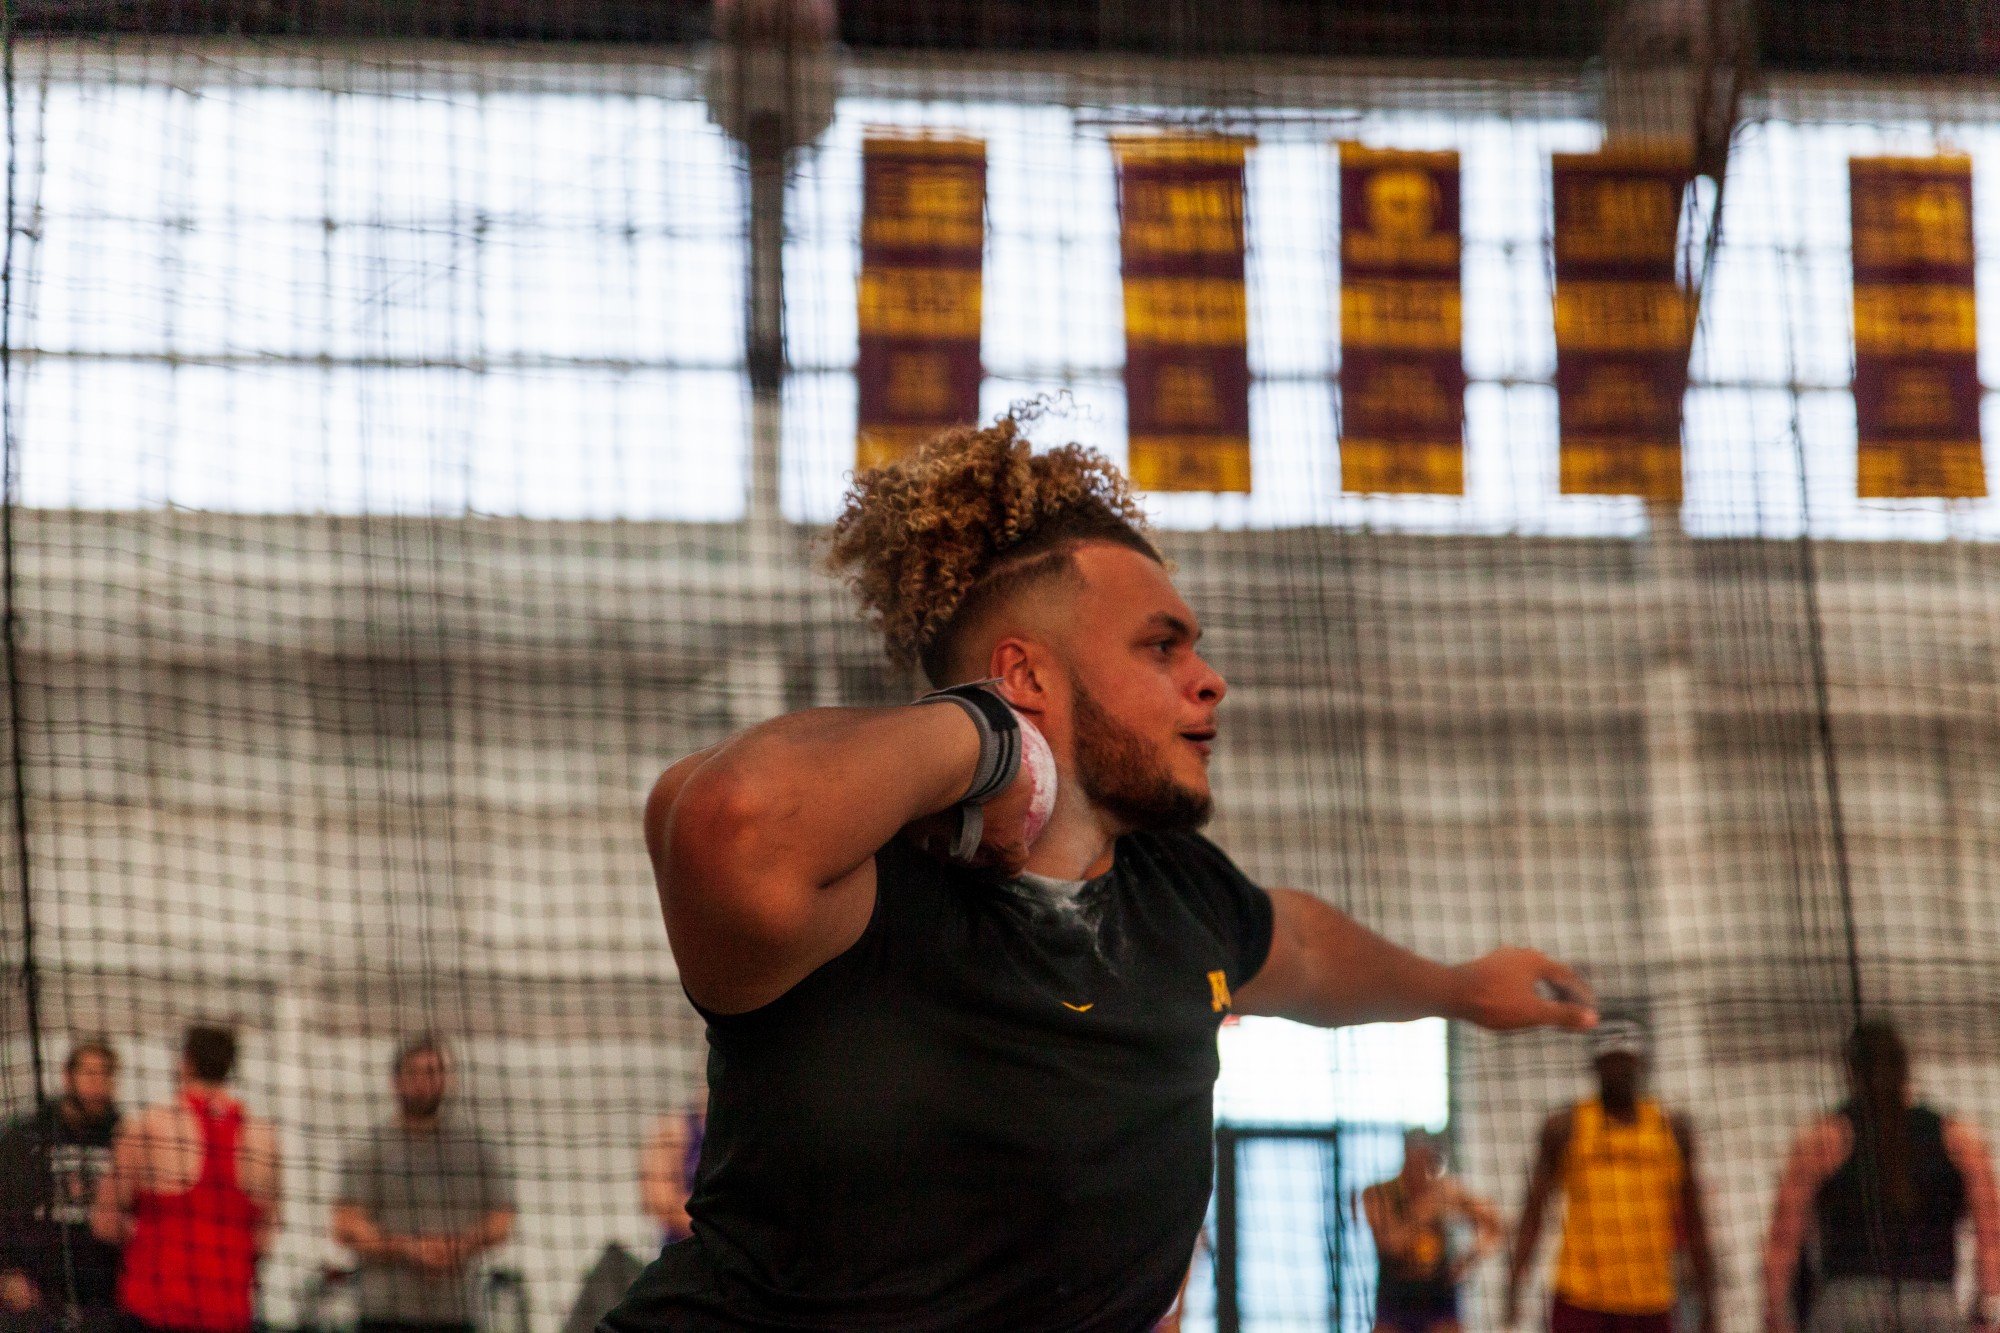 Gophers Freshman Kyle Atkinson competes unattached in the shot put at the Minnesota Cold Classic at the University of Minnesota Fieldhouse on Friday, Feb. 21.